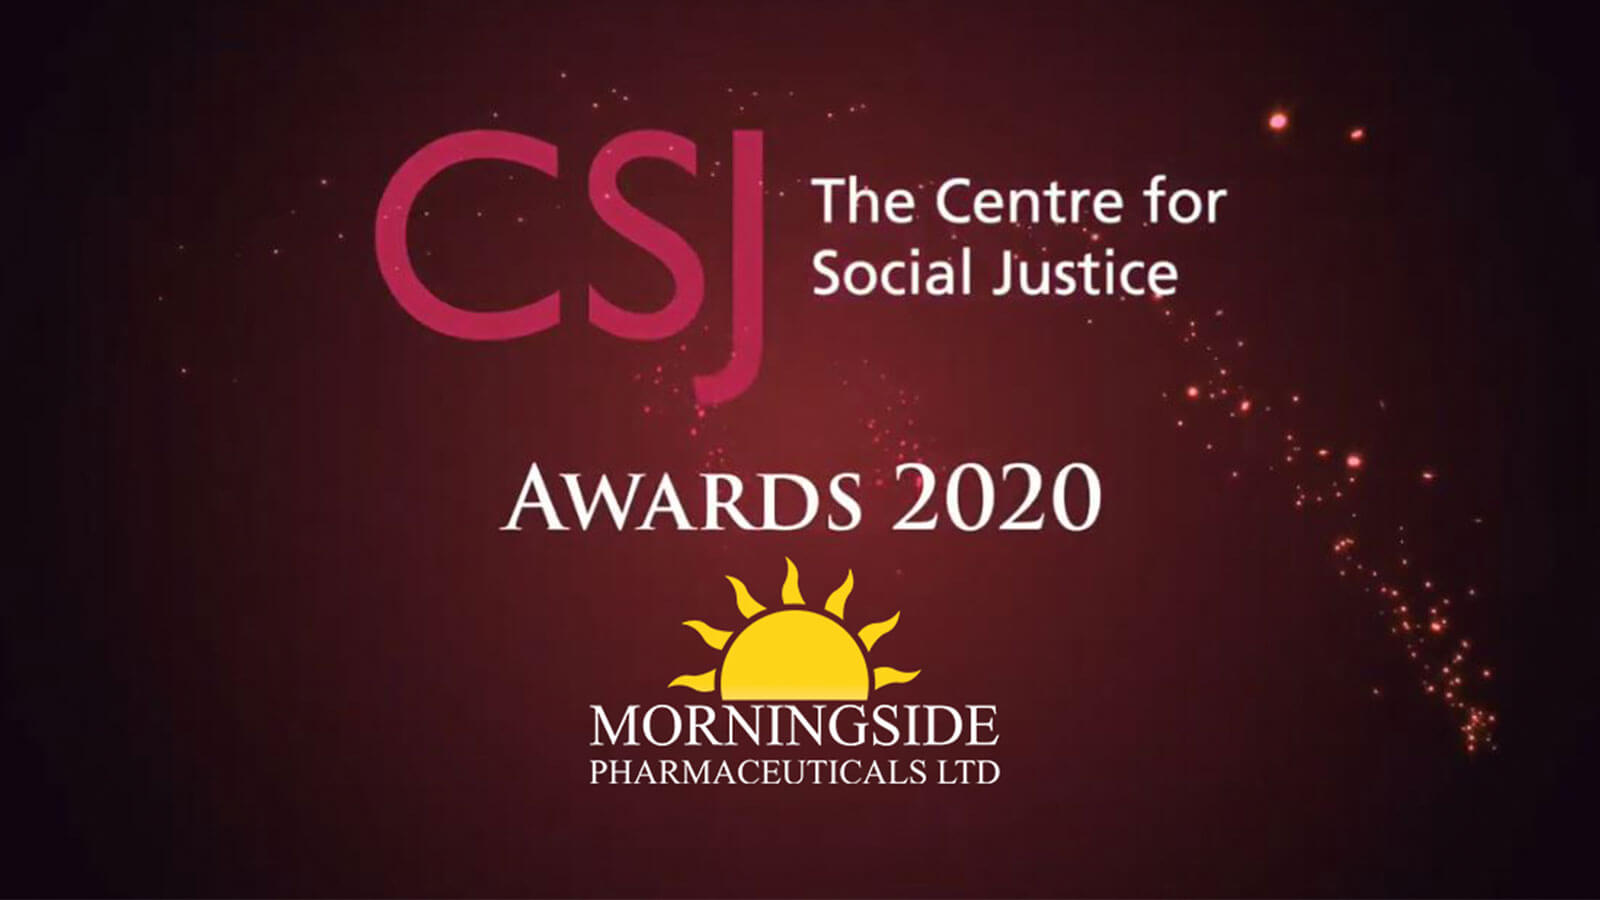 CSJ (Centre for Social Justice) Awards